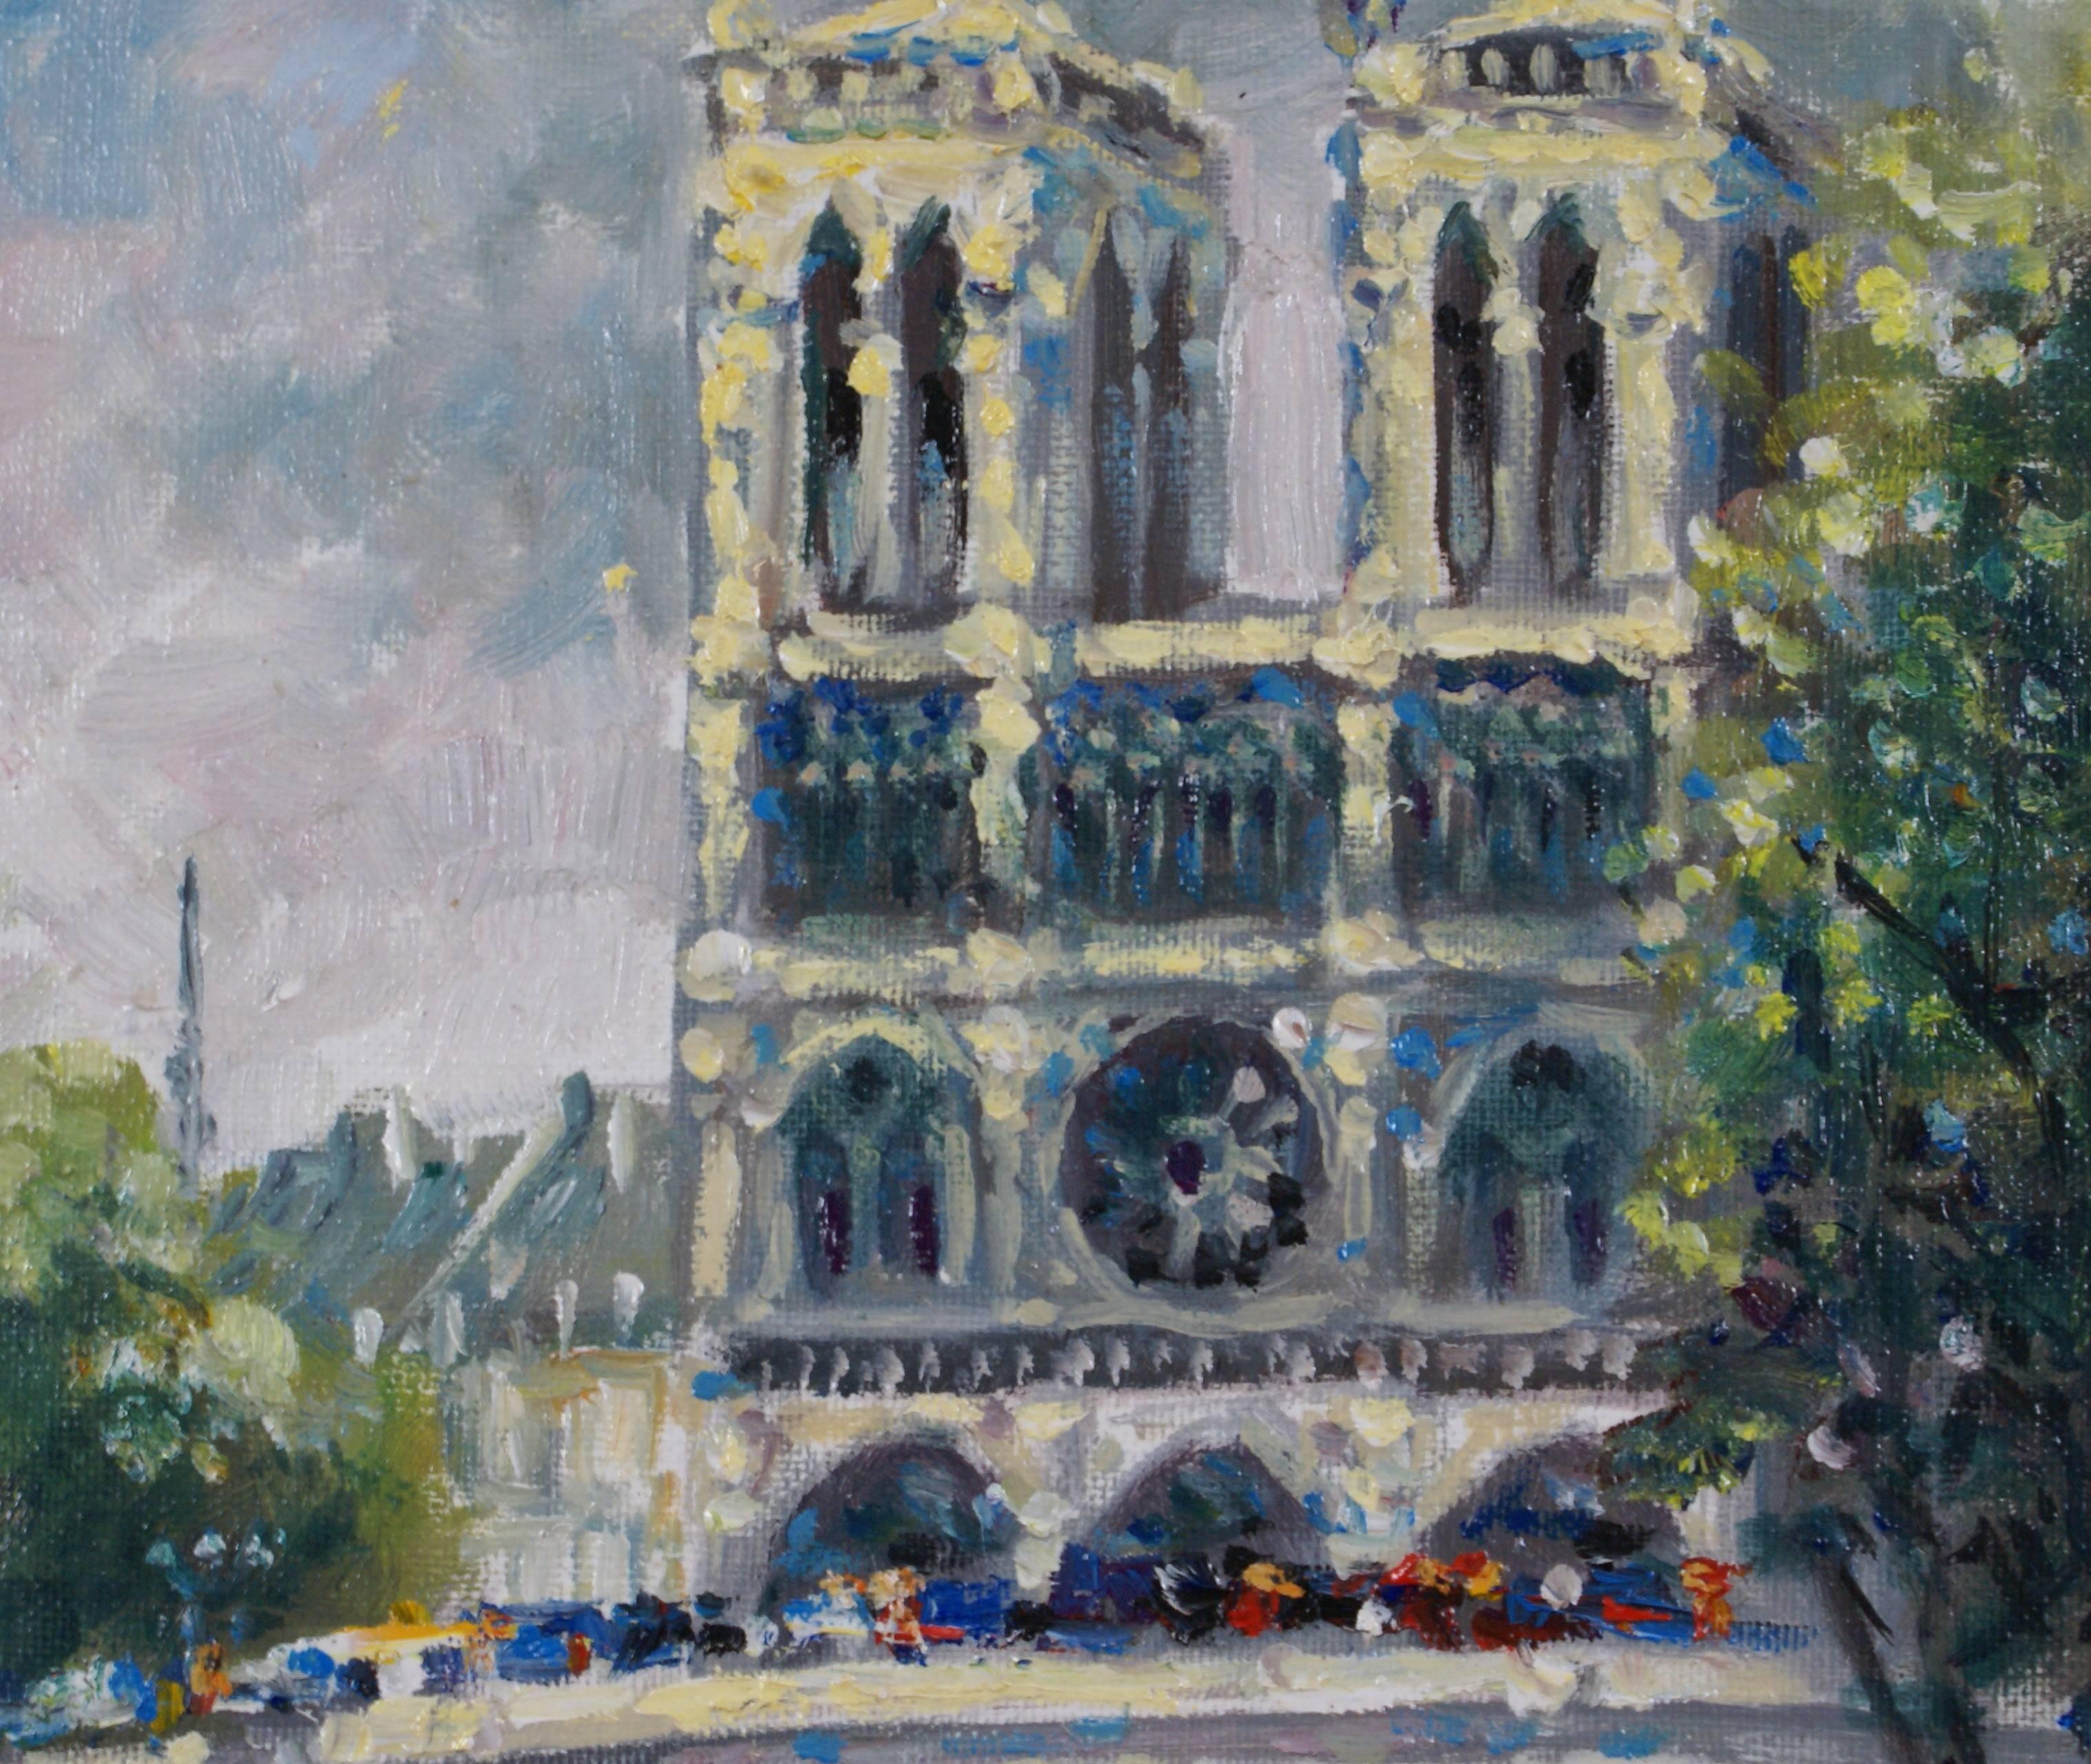 Notre Dame, Paris - Gray Figurative Painting by Unknown